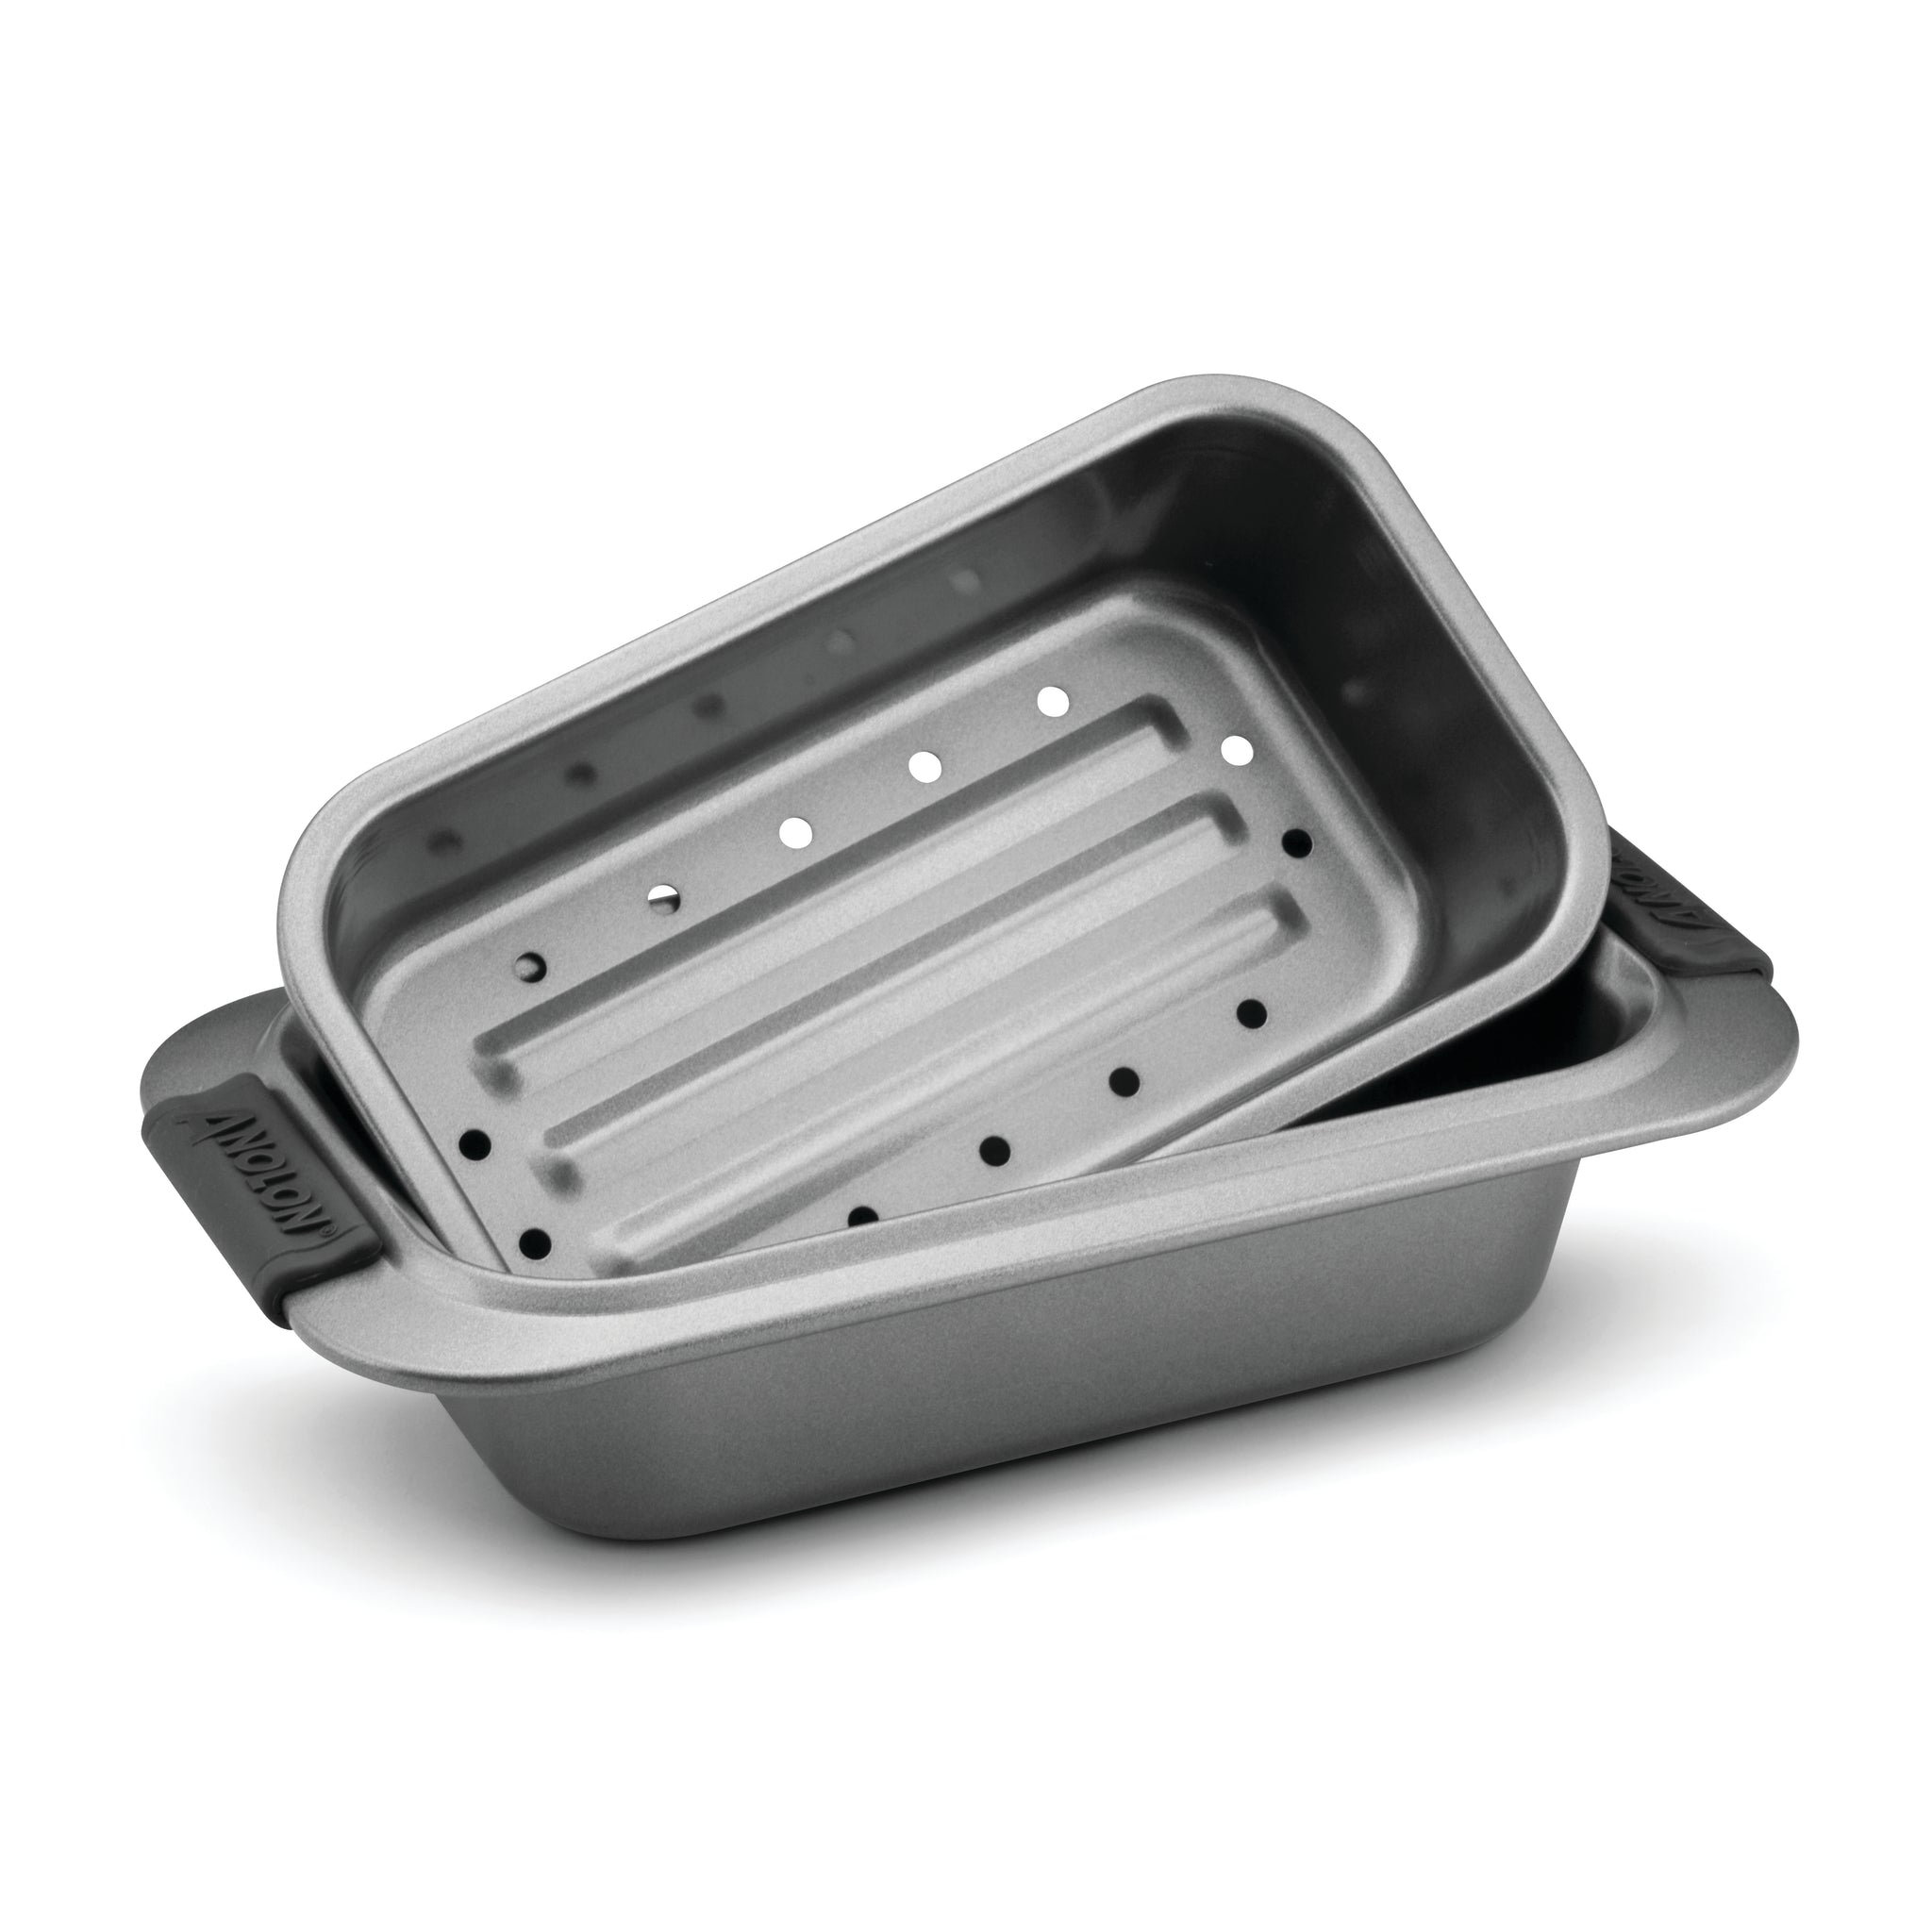 Nonstick 9 X 5 X 2.7 Large Loaf Pan, Meatloaf & Bread Pan Gray Durable  steel